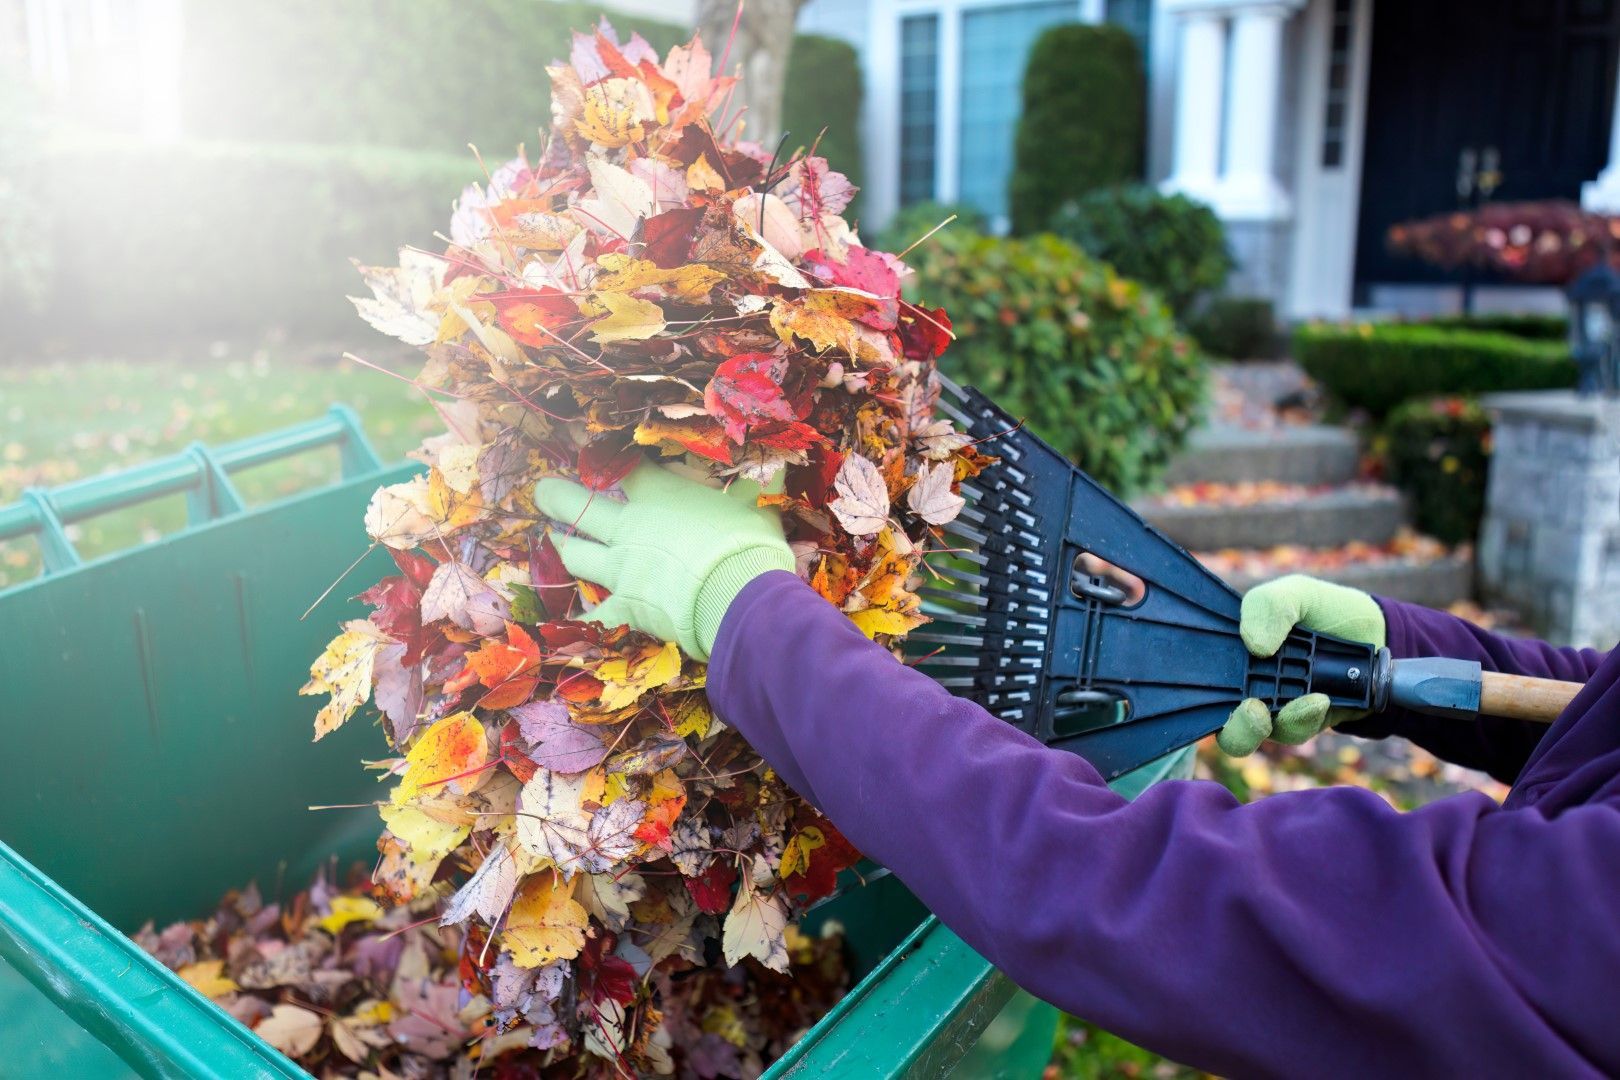 A picture of a person using a leaf blower to clean fall leaves from a lawn.